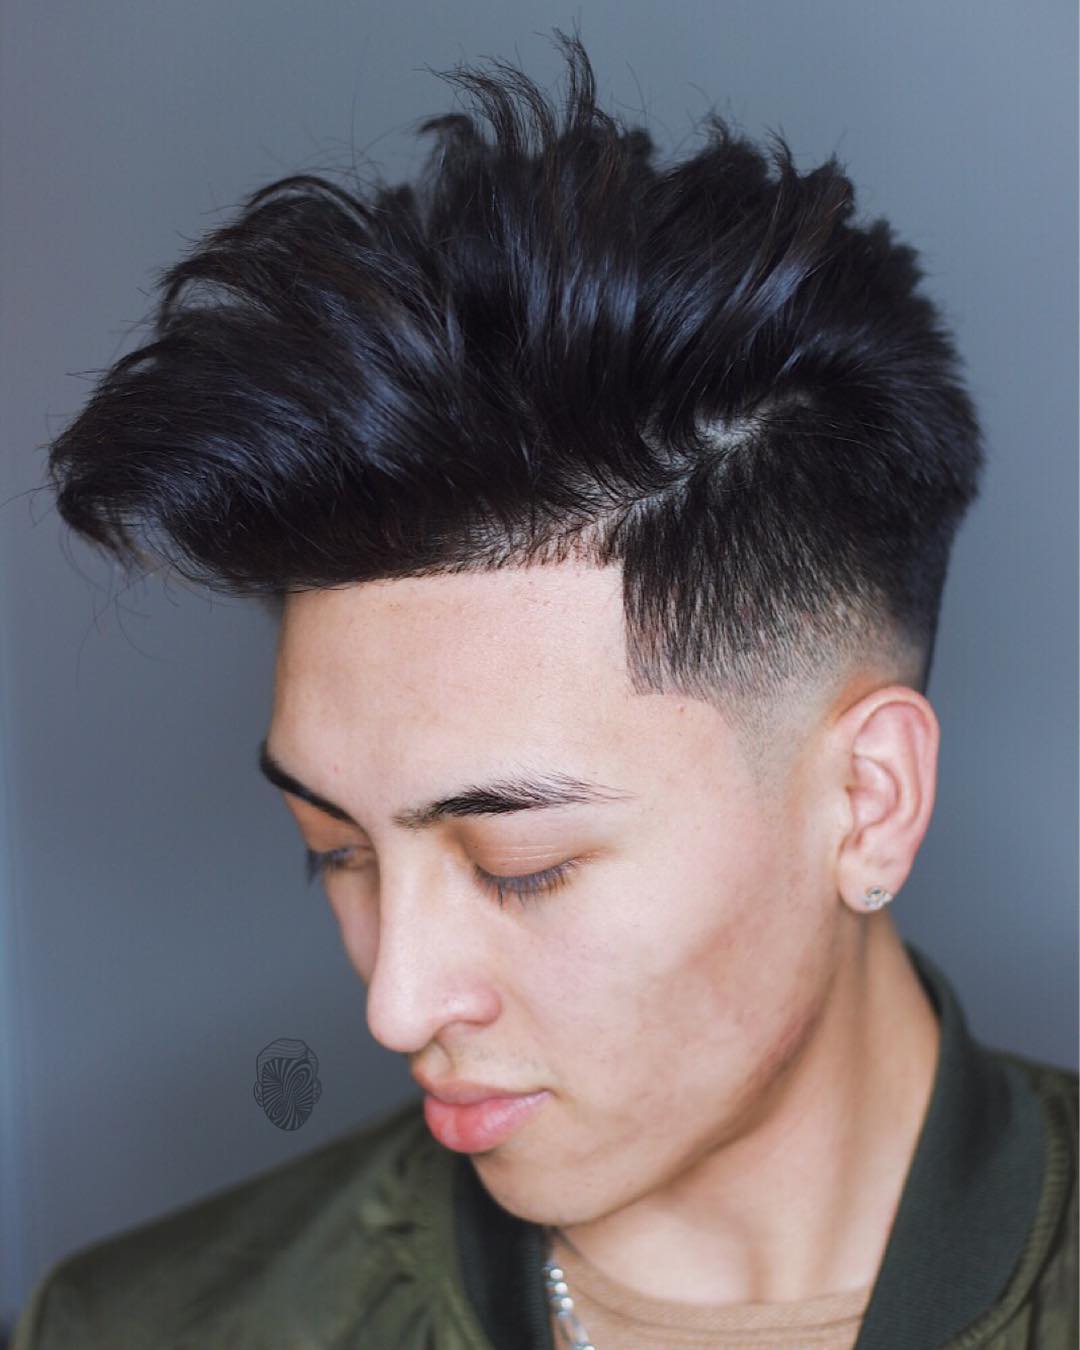 Messy pompadour hairstyle low bald fade